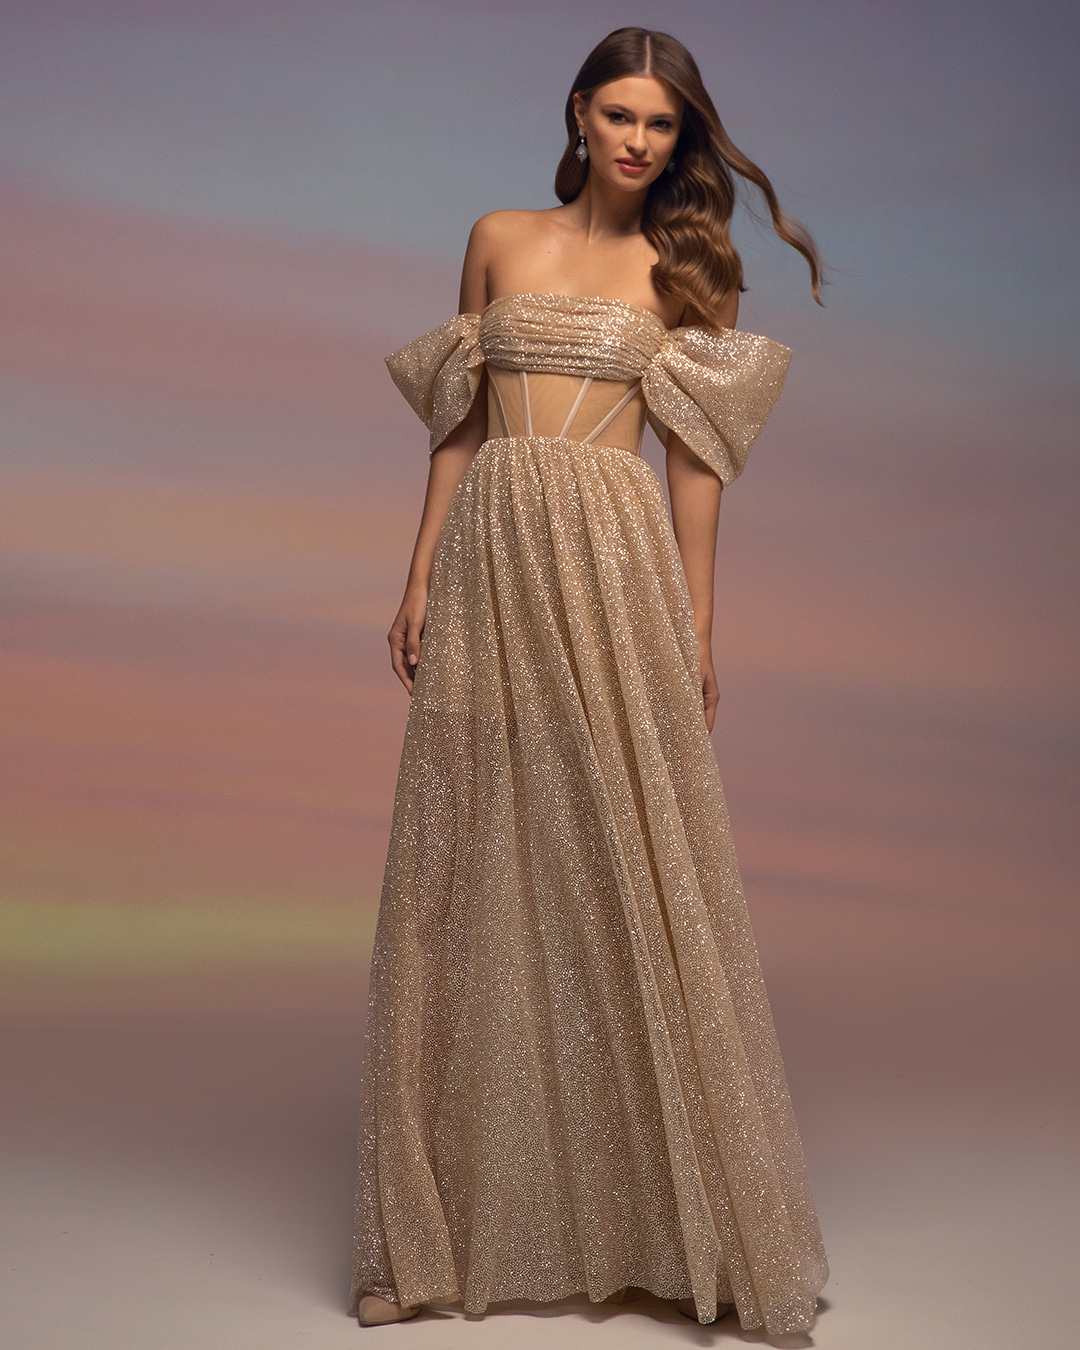 gold wedding gowns a line off the shoulder champagne rebel